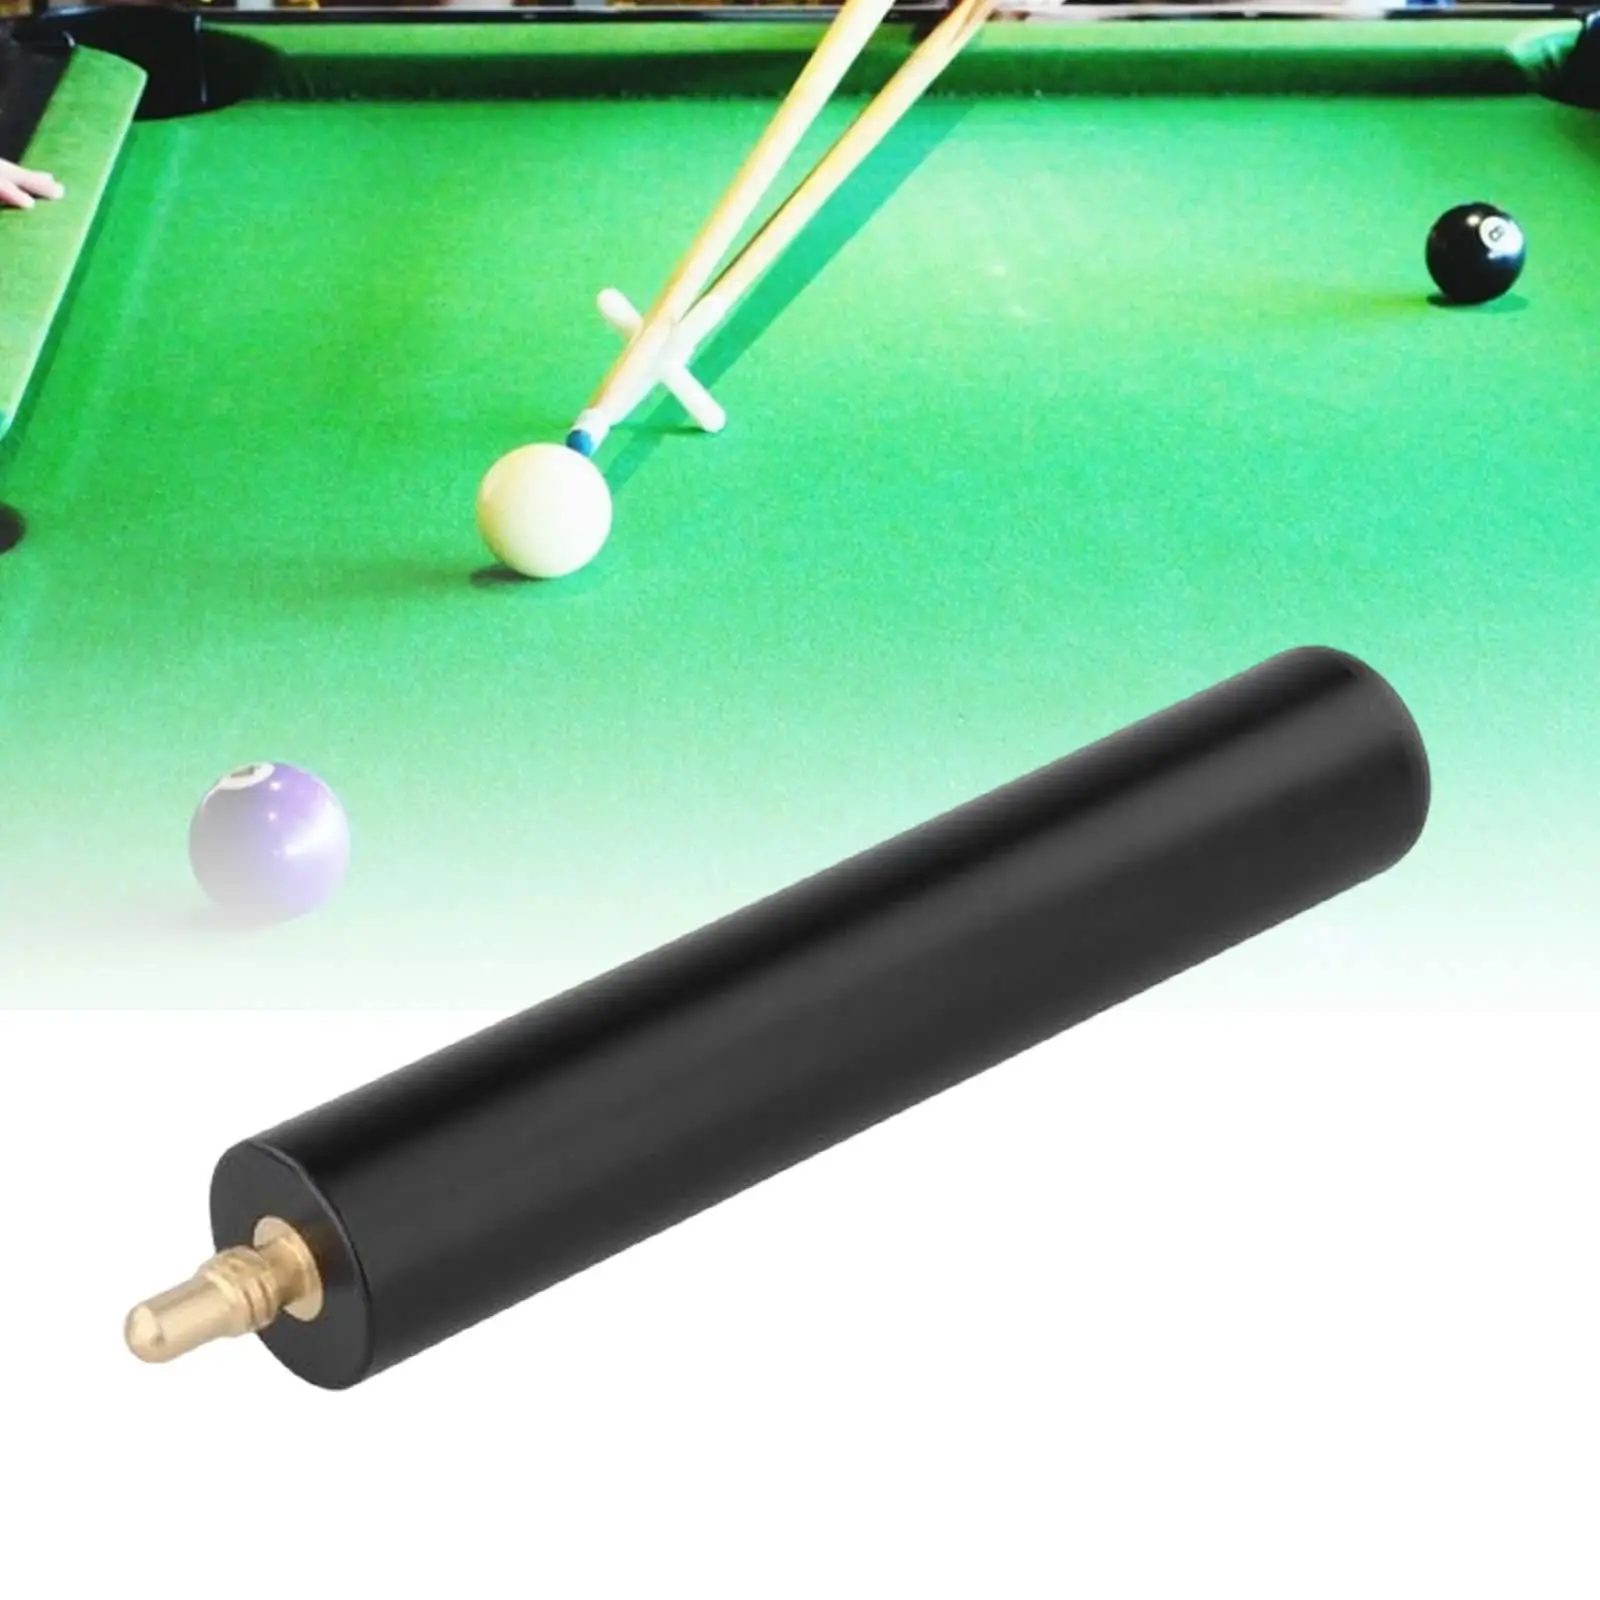 Portable Cue Stick Extender Weights Replacement 6in Billiards Pool Cue Extension for Billiard Cues